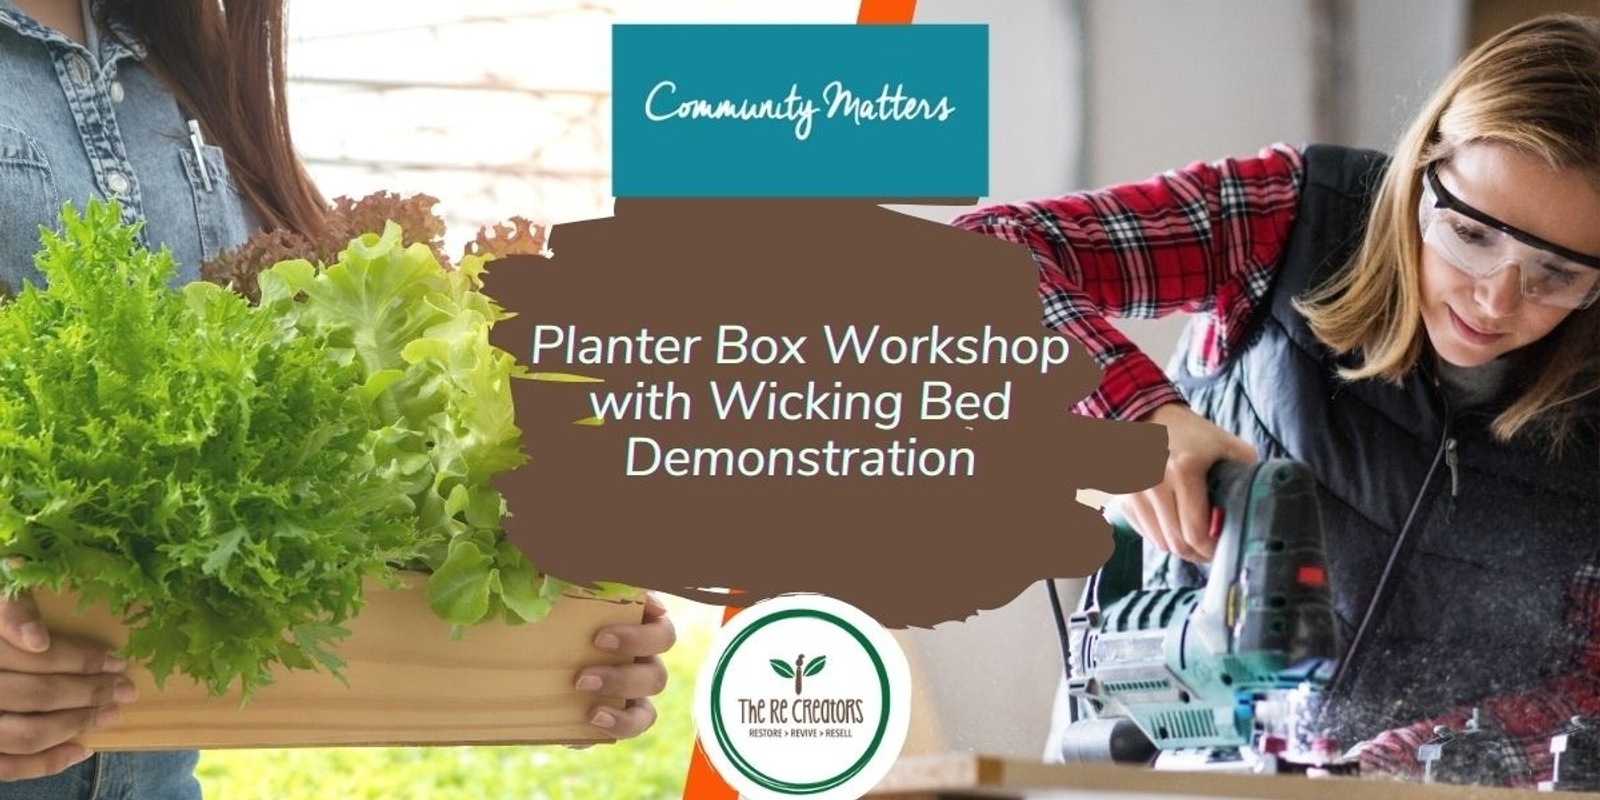 Banner image for Planter Box Workshop with Wicking Bed Demonstration: Power Tools 101, Hope Teaching Garden New Lynn, Sun 24 Mar 10am-2pm